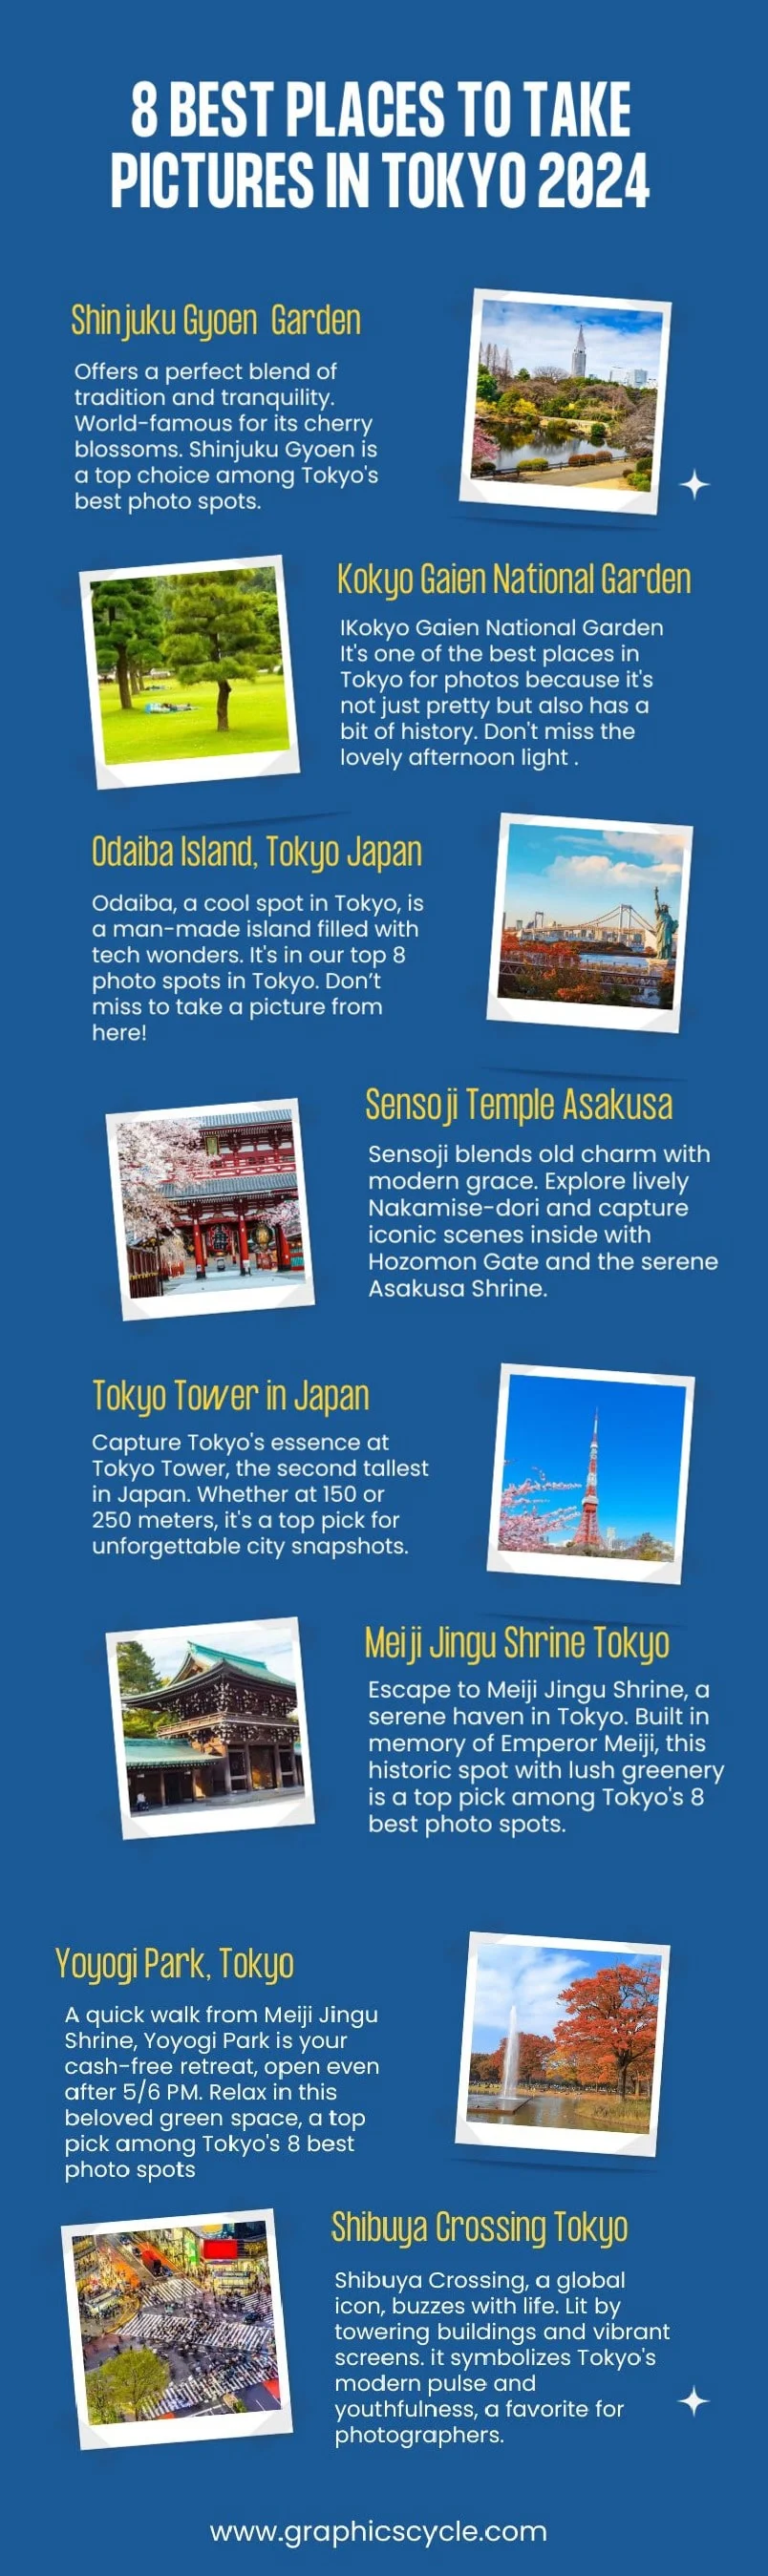 8 Best Places in Tokyo to Take Pictures 2024, Graphicscycle